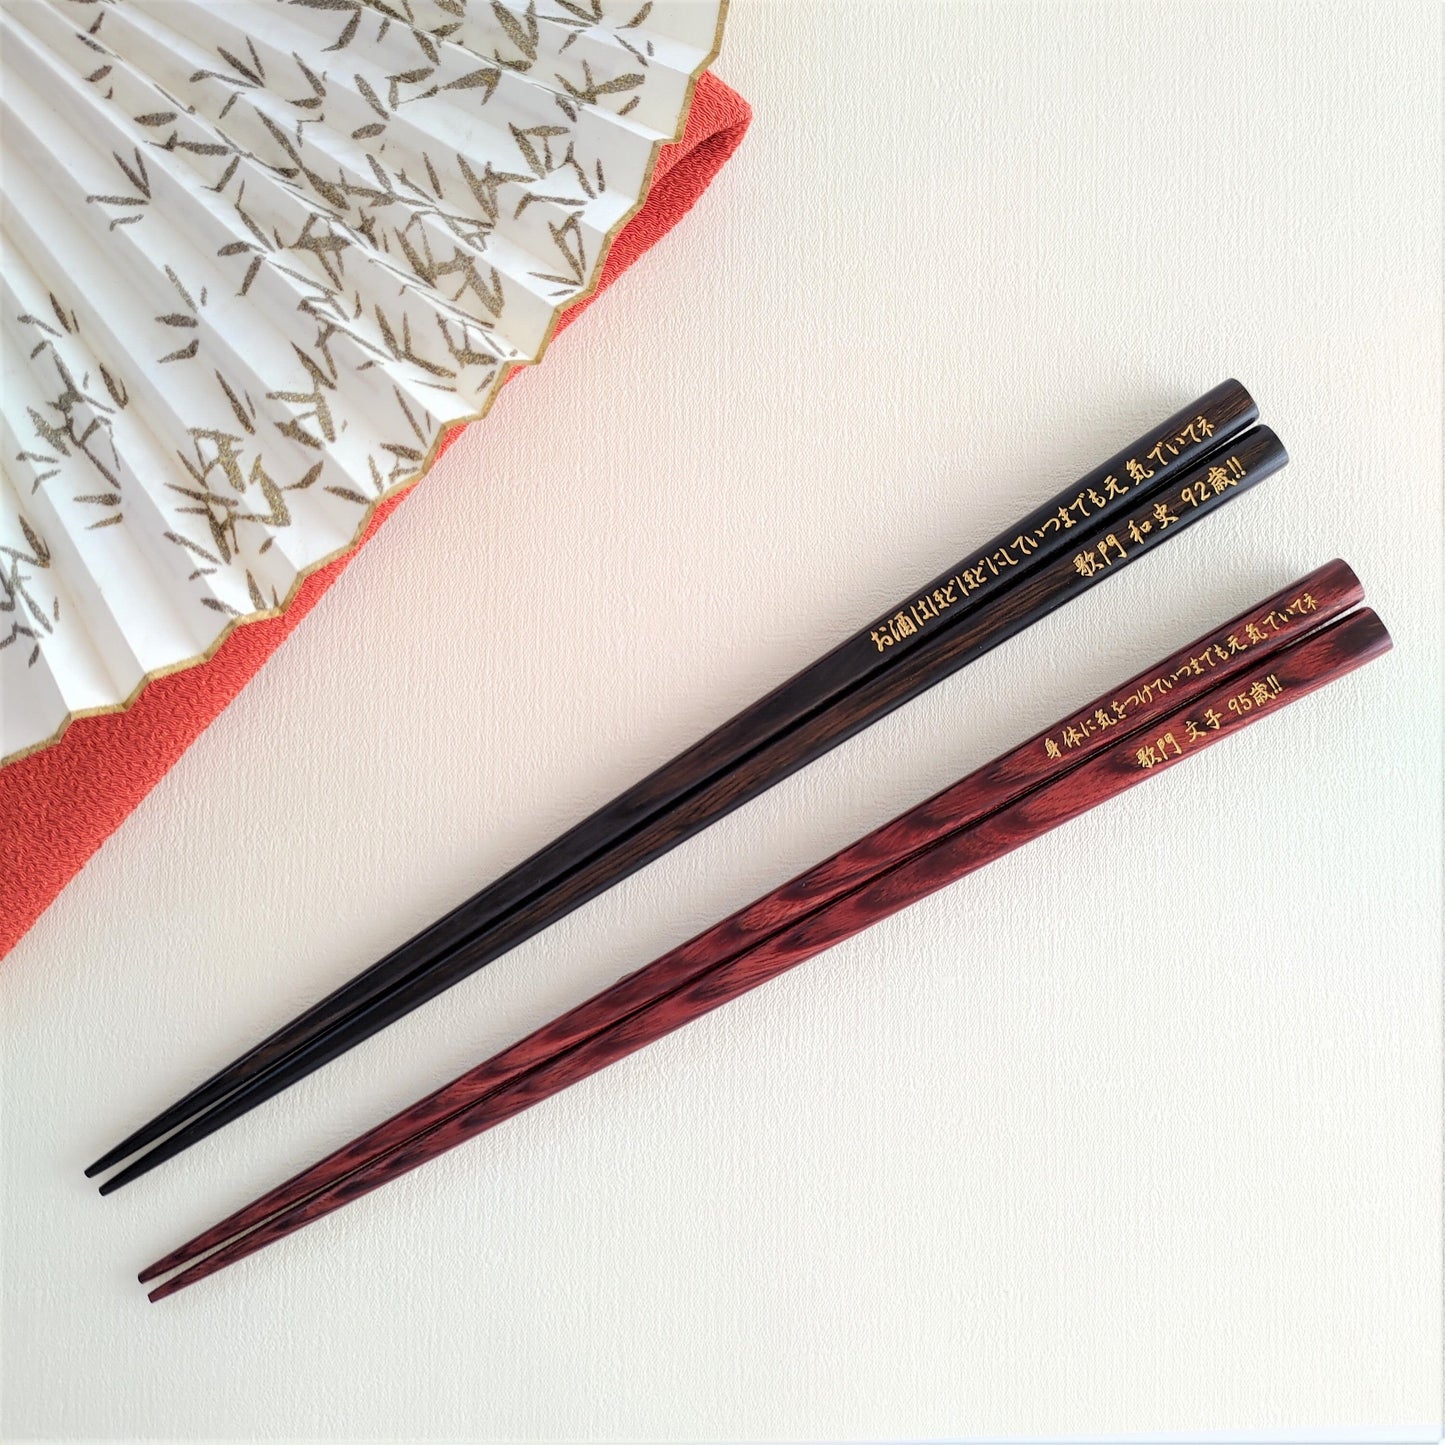 Awesome Japanese chopsticks with soft fur design black brown - DOUBLE PAIR